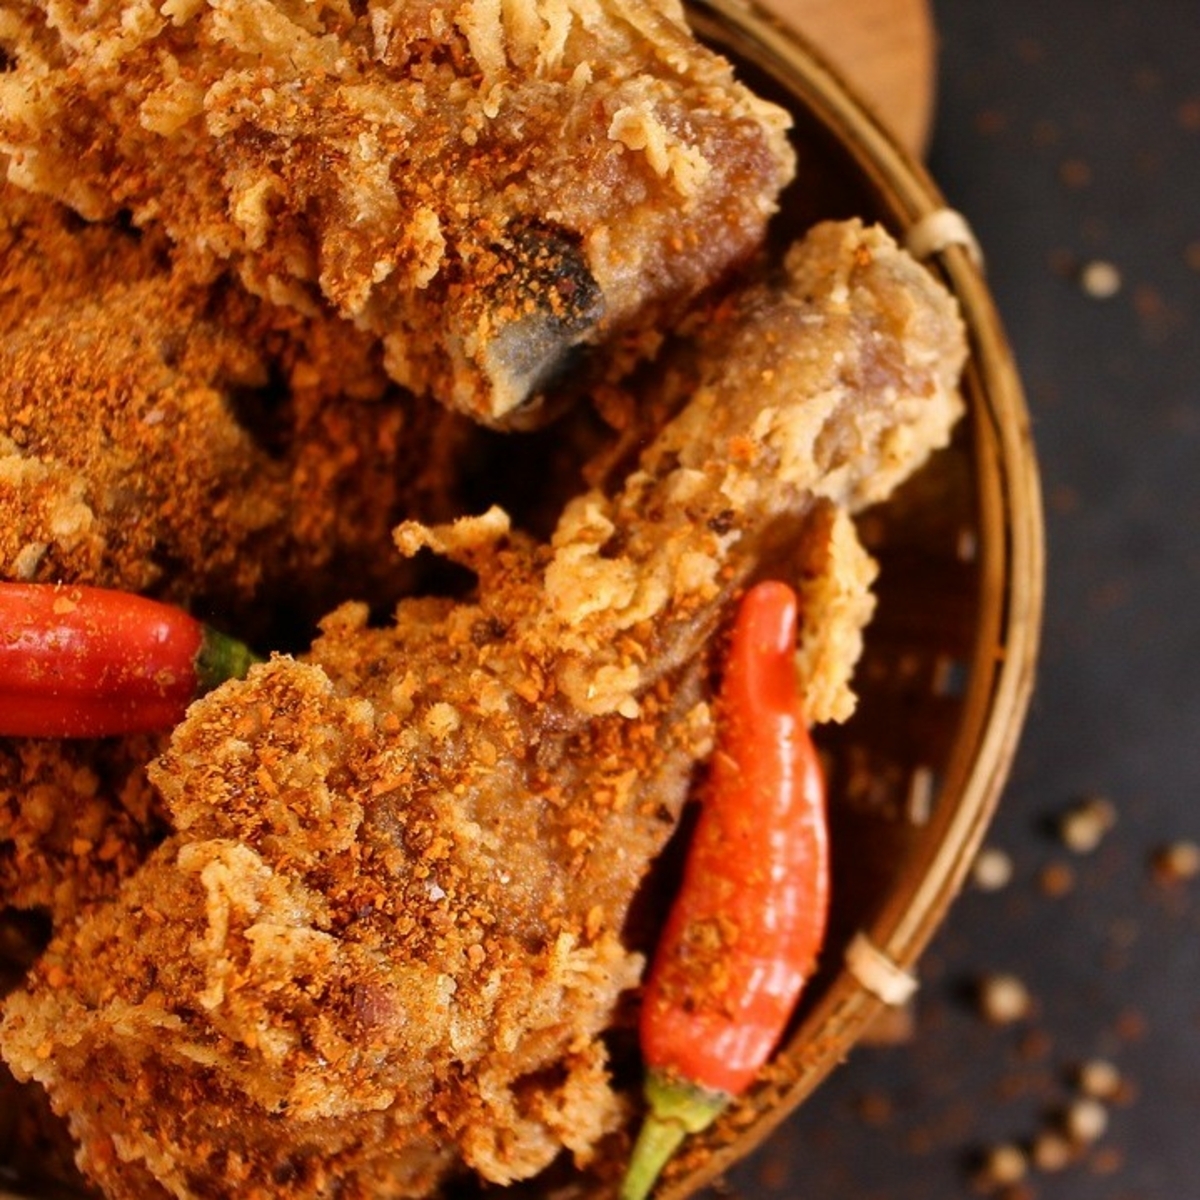 While you're in town for #CMAfest on June 6-9, be sure to sink your teeth into a #Nashville original; Hot Chicken! This famous spicy fried chicken dish can be found at various restaurants around the city, so start your journey at bit.ly/2YDGsq0. #hotchicken